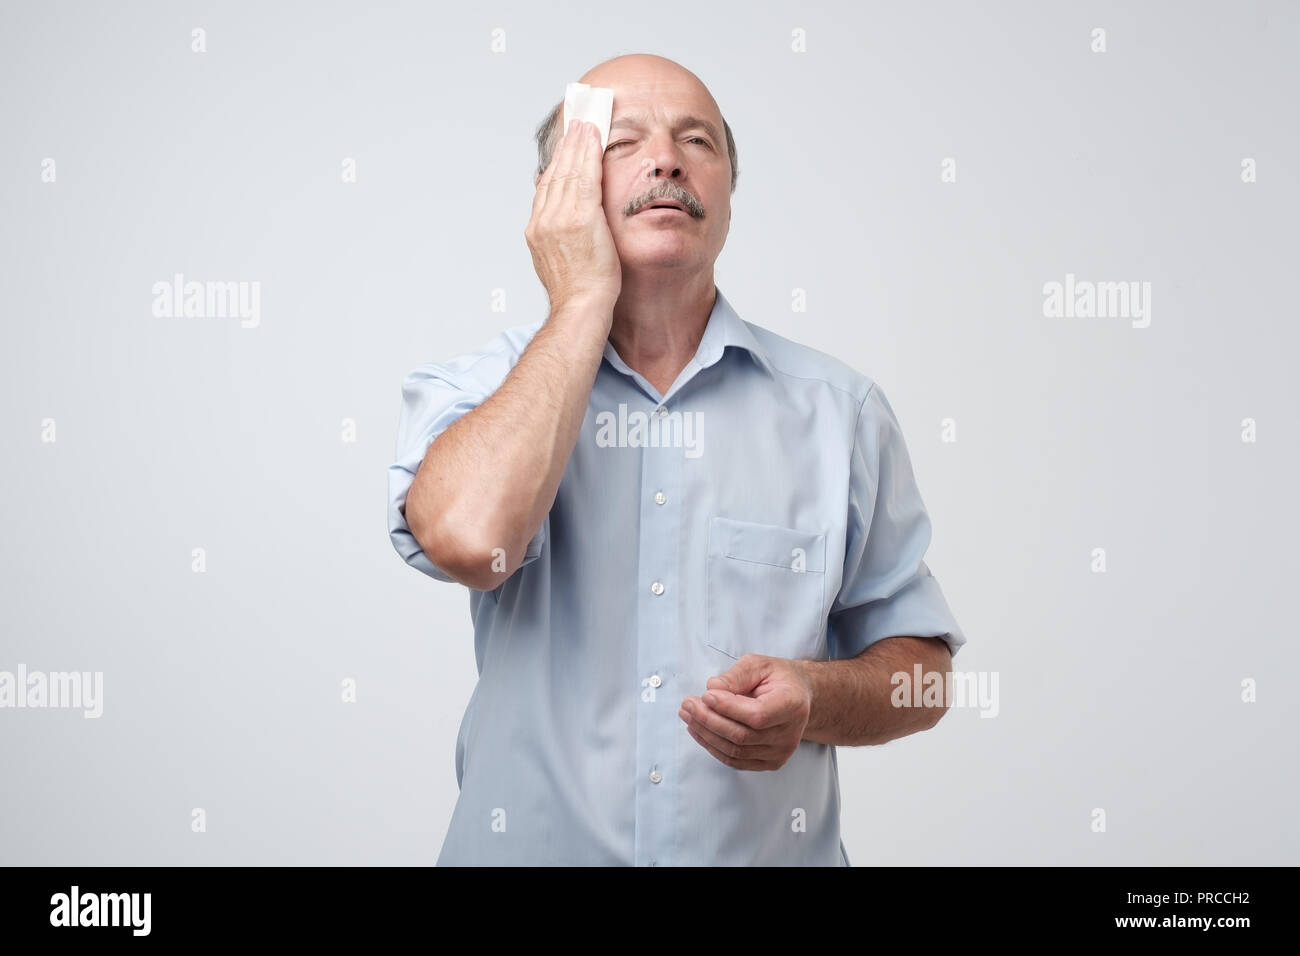 Tired old man with mustache stressed sweating having fever headache isolated on gray wall background. Worried guy wipes sweat on his face Stock Photo